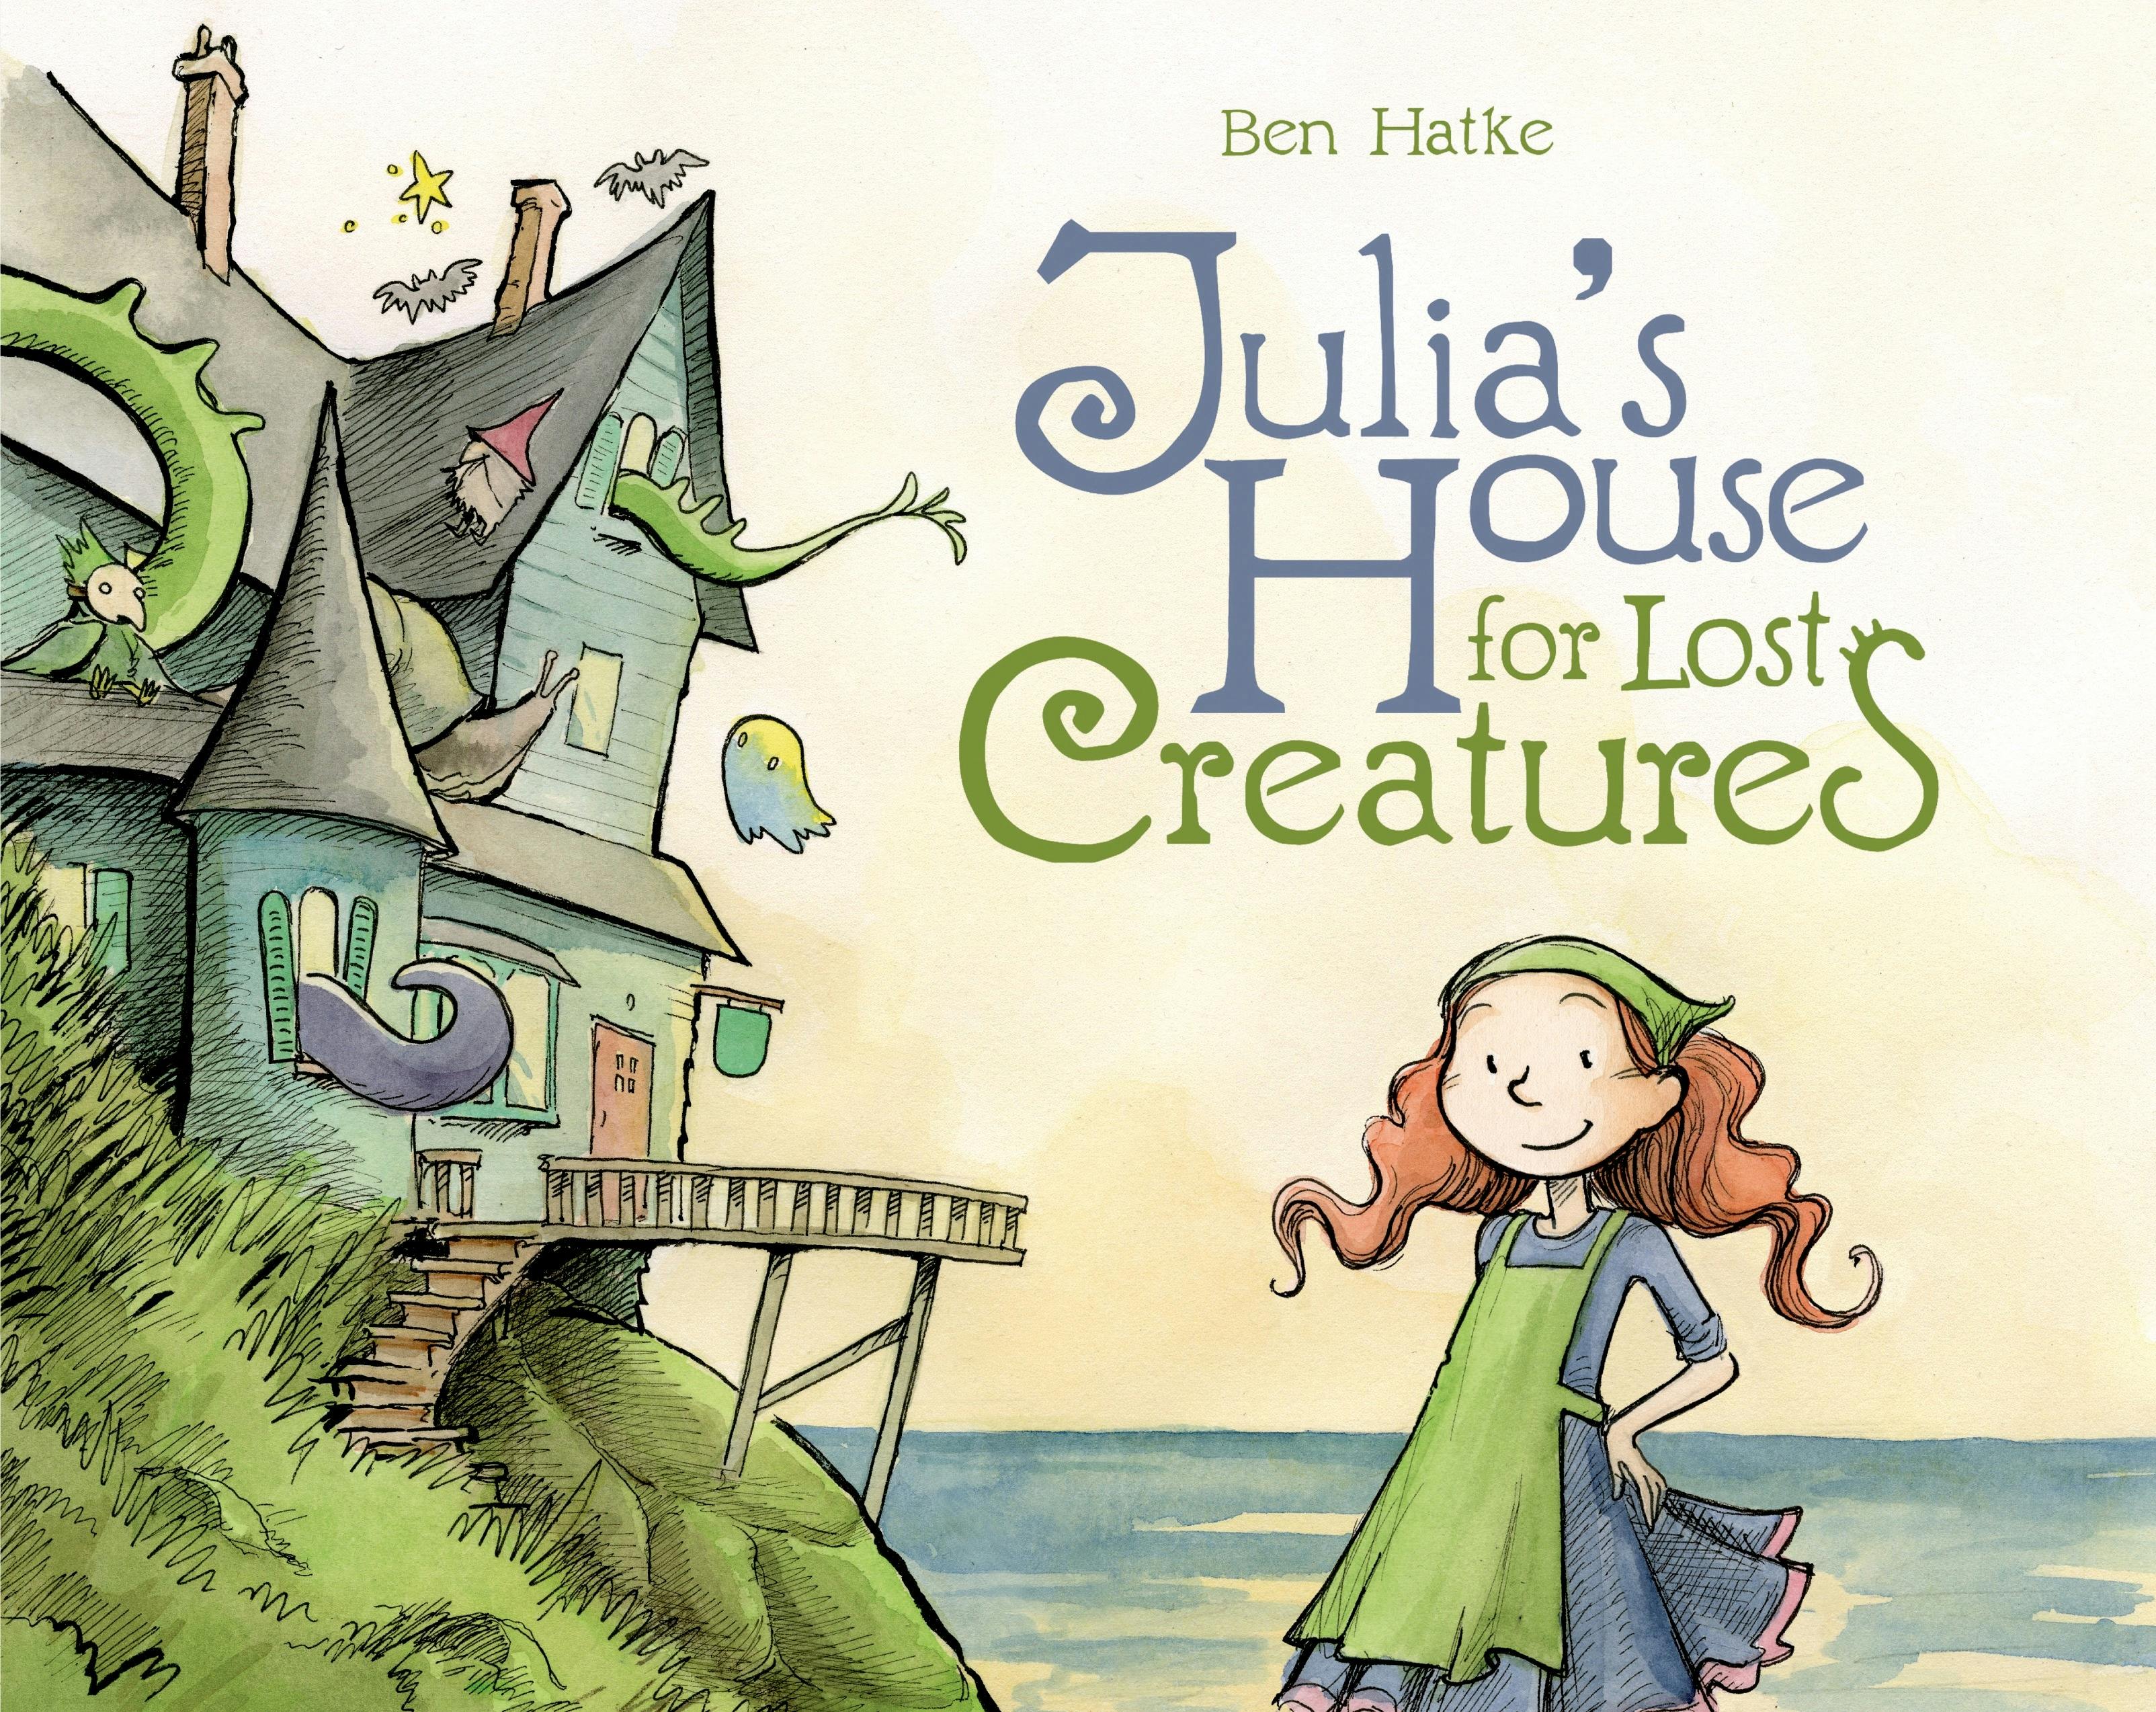 Image of Julia's House for Lost Creatures